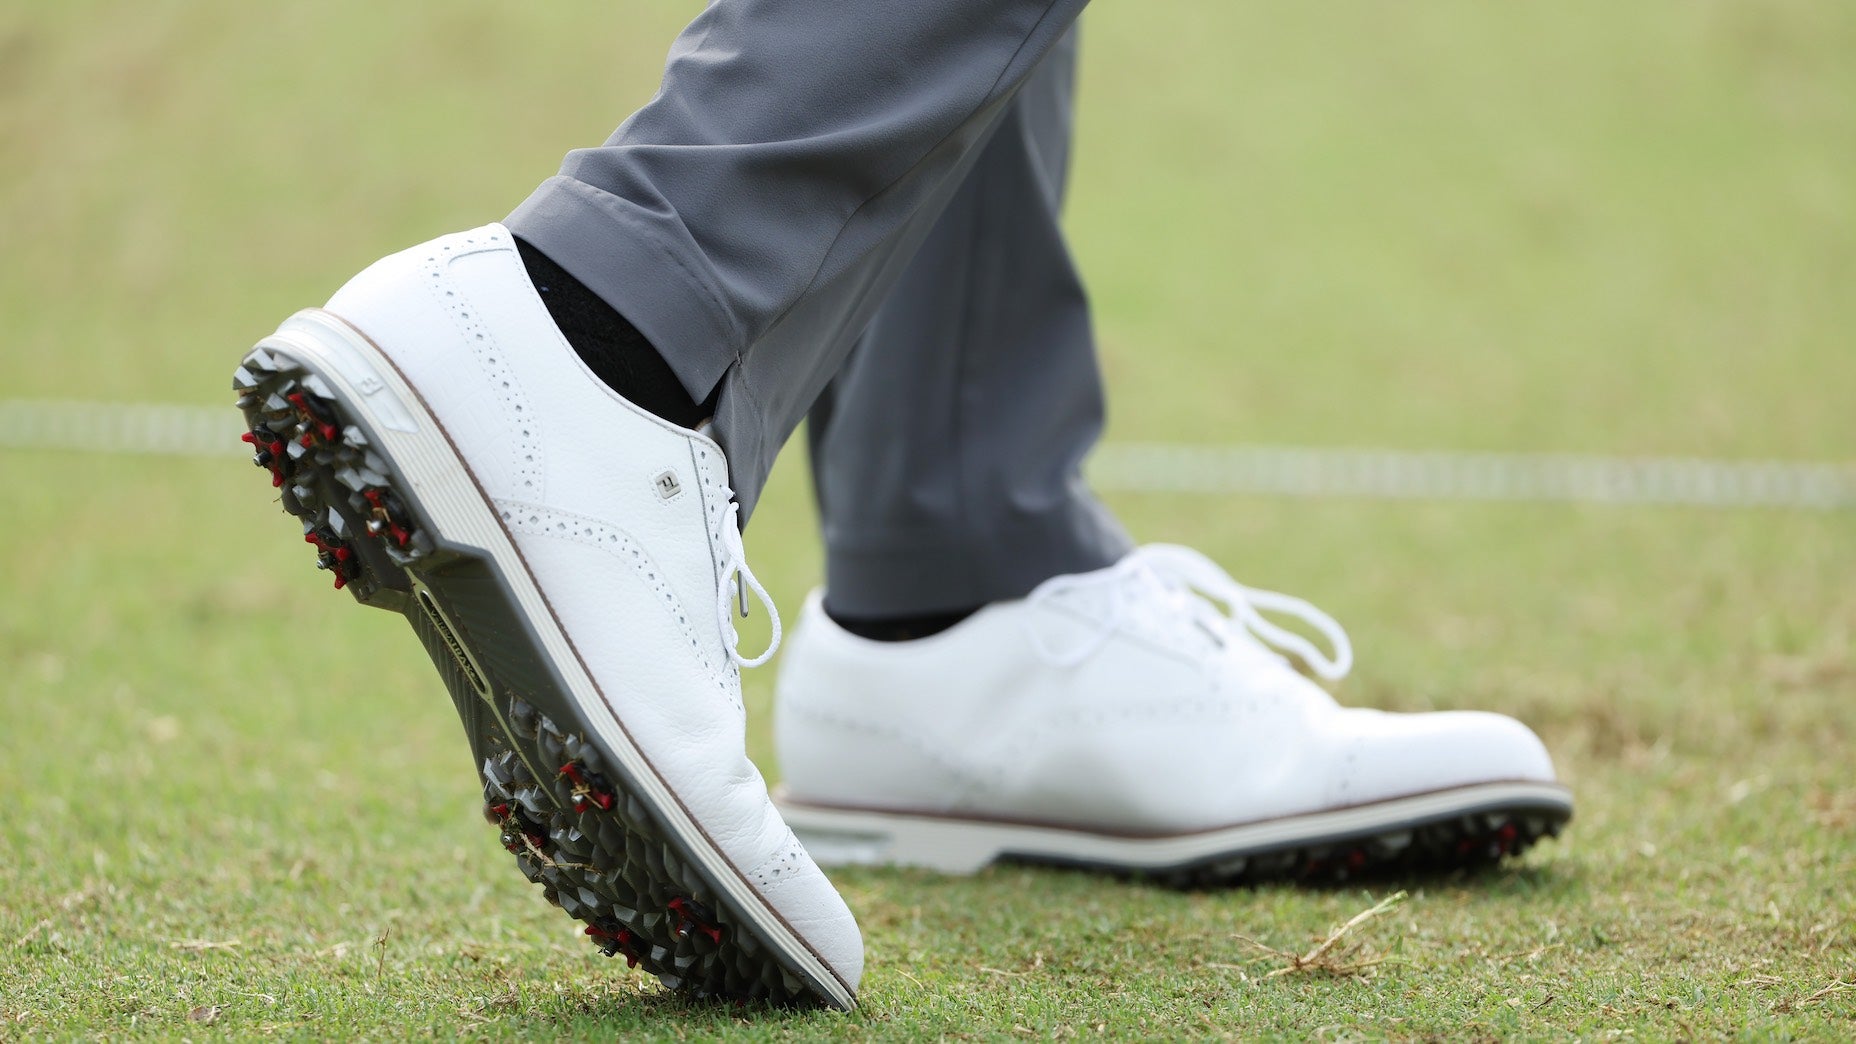 How many tour Fully | pros mailbag spikes? Equipped wear still metal